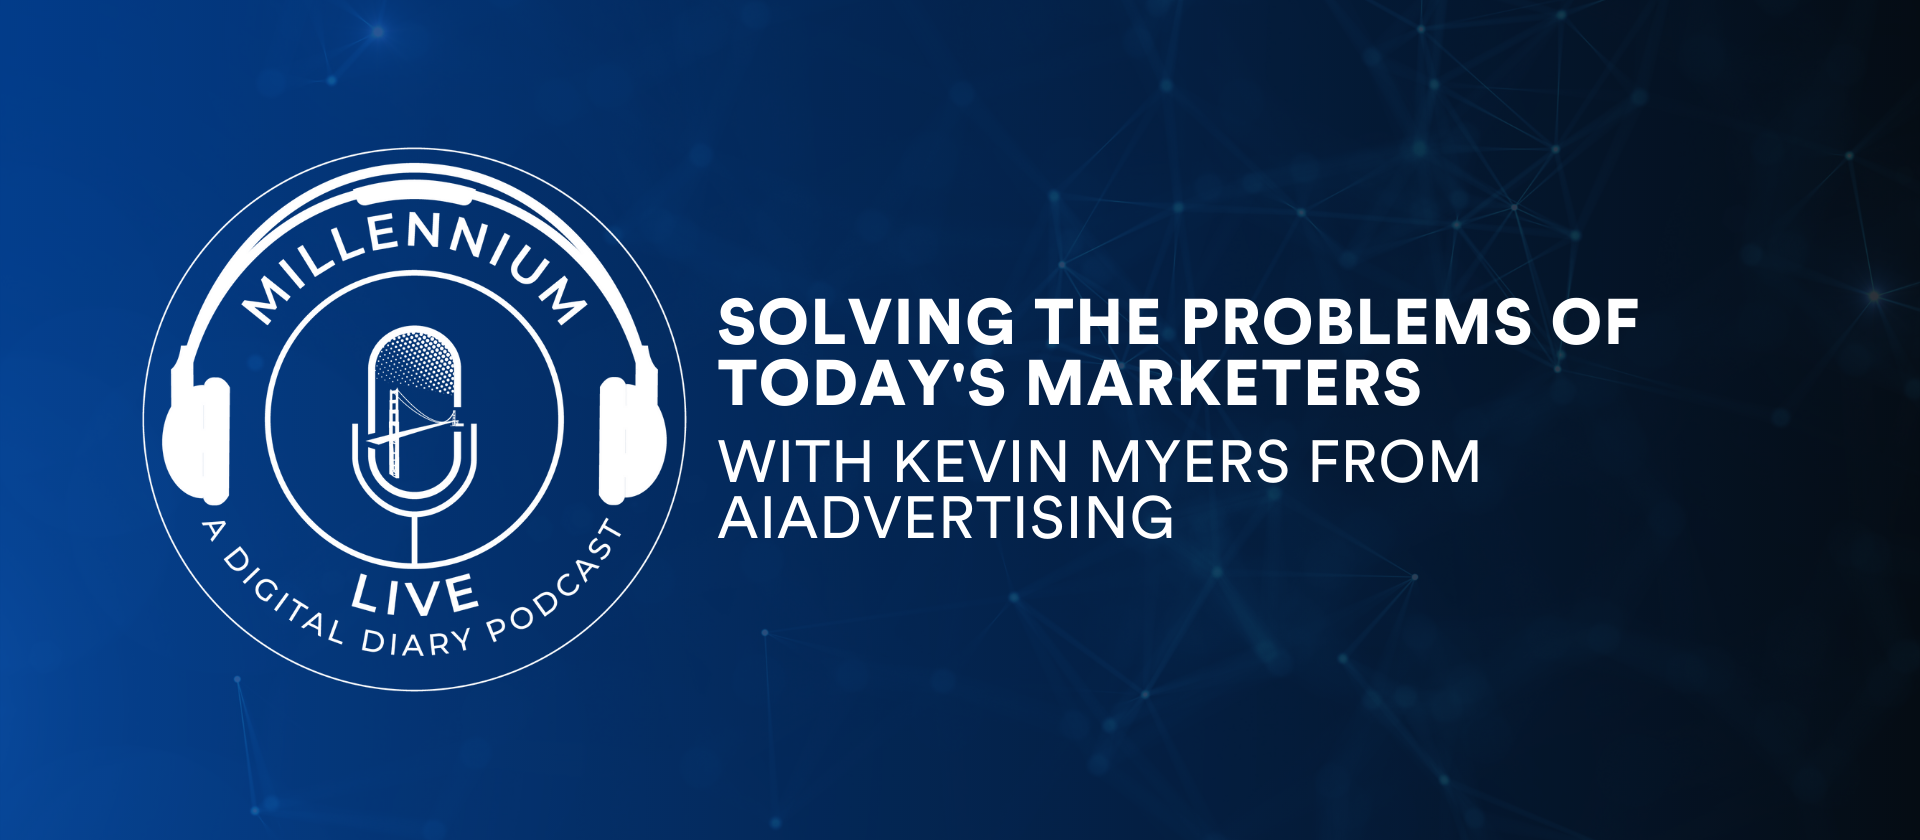 #MillenniumLive on Solving The Problems of Today’s Marketers with AiAdvertising